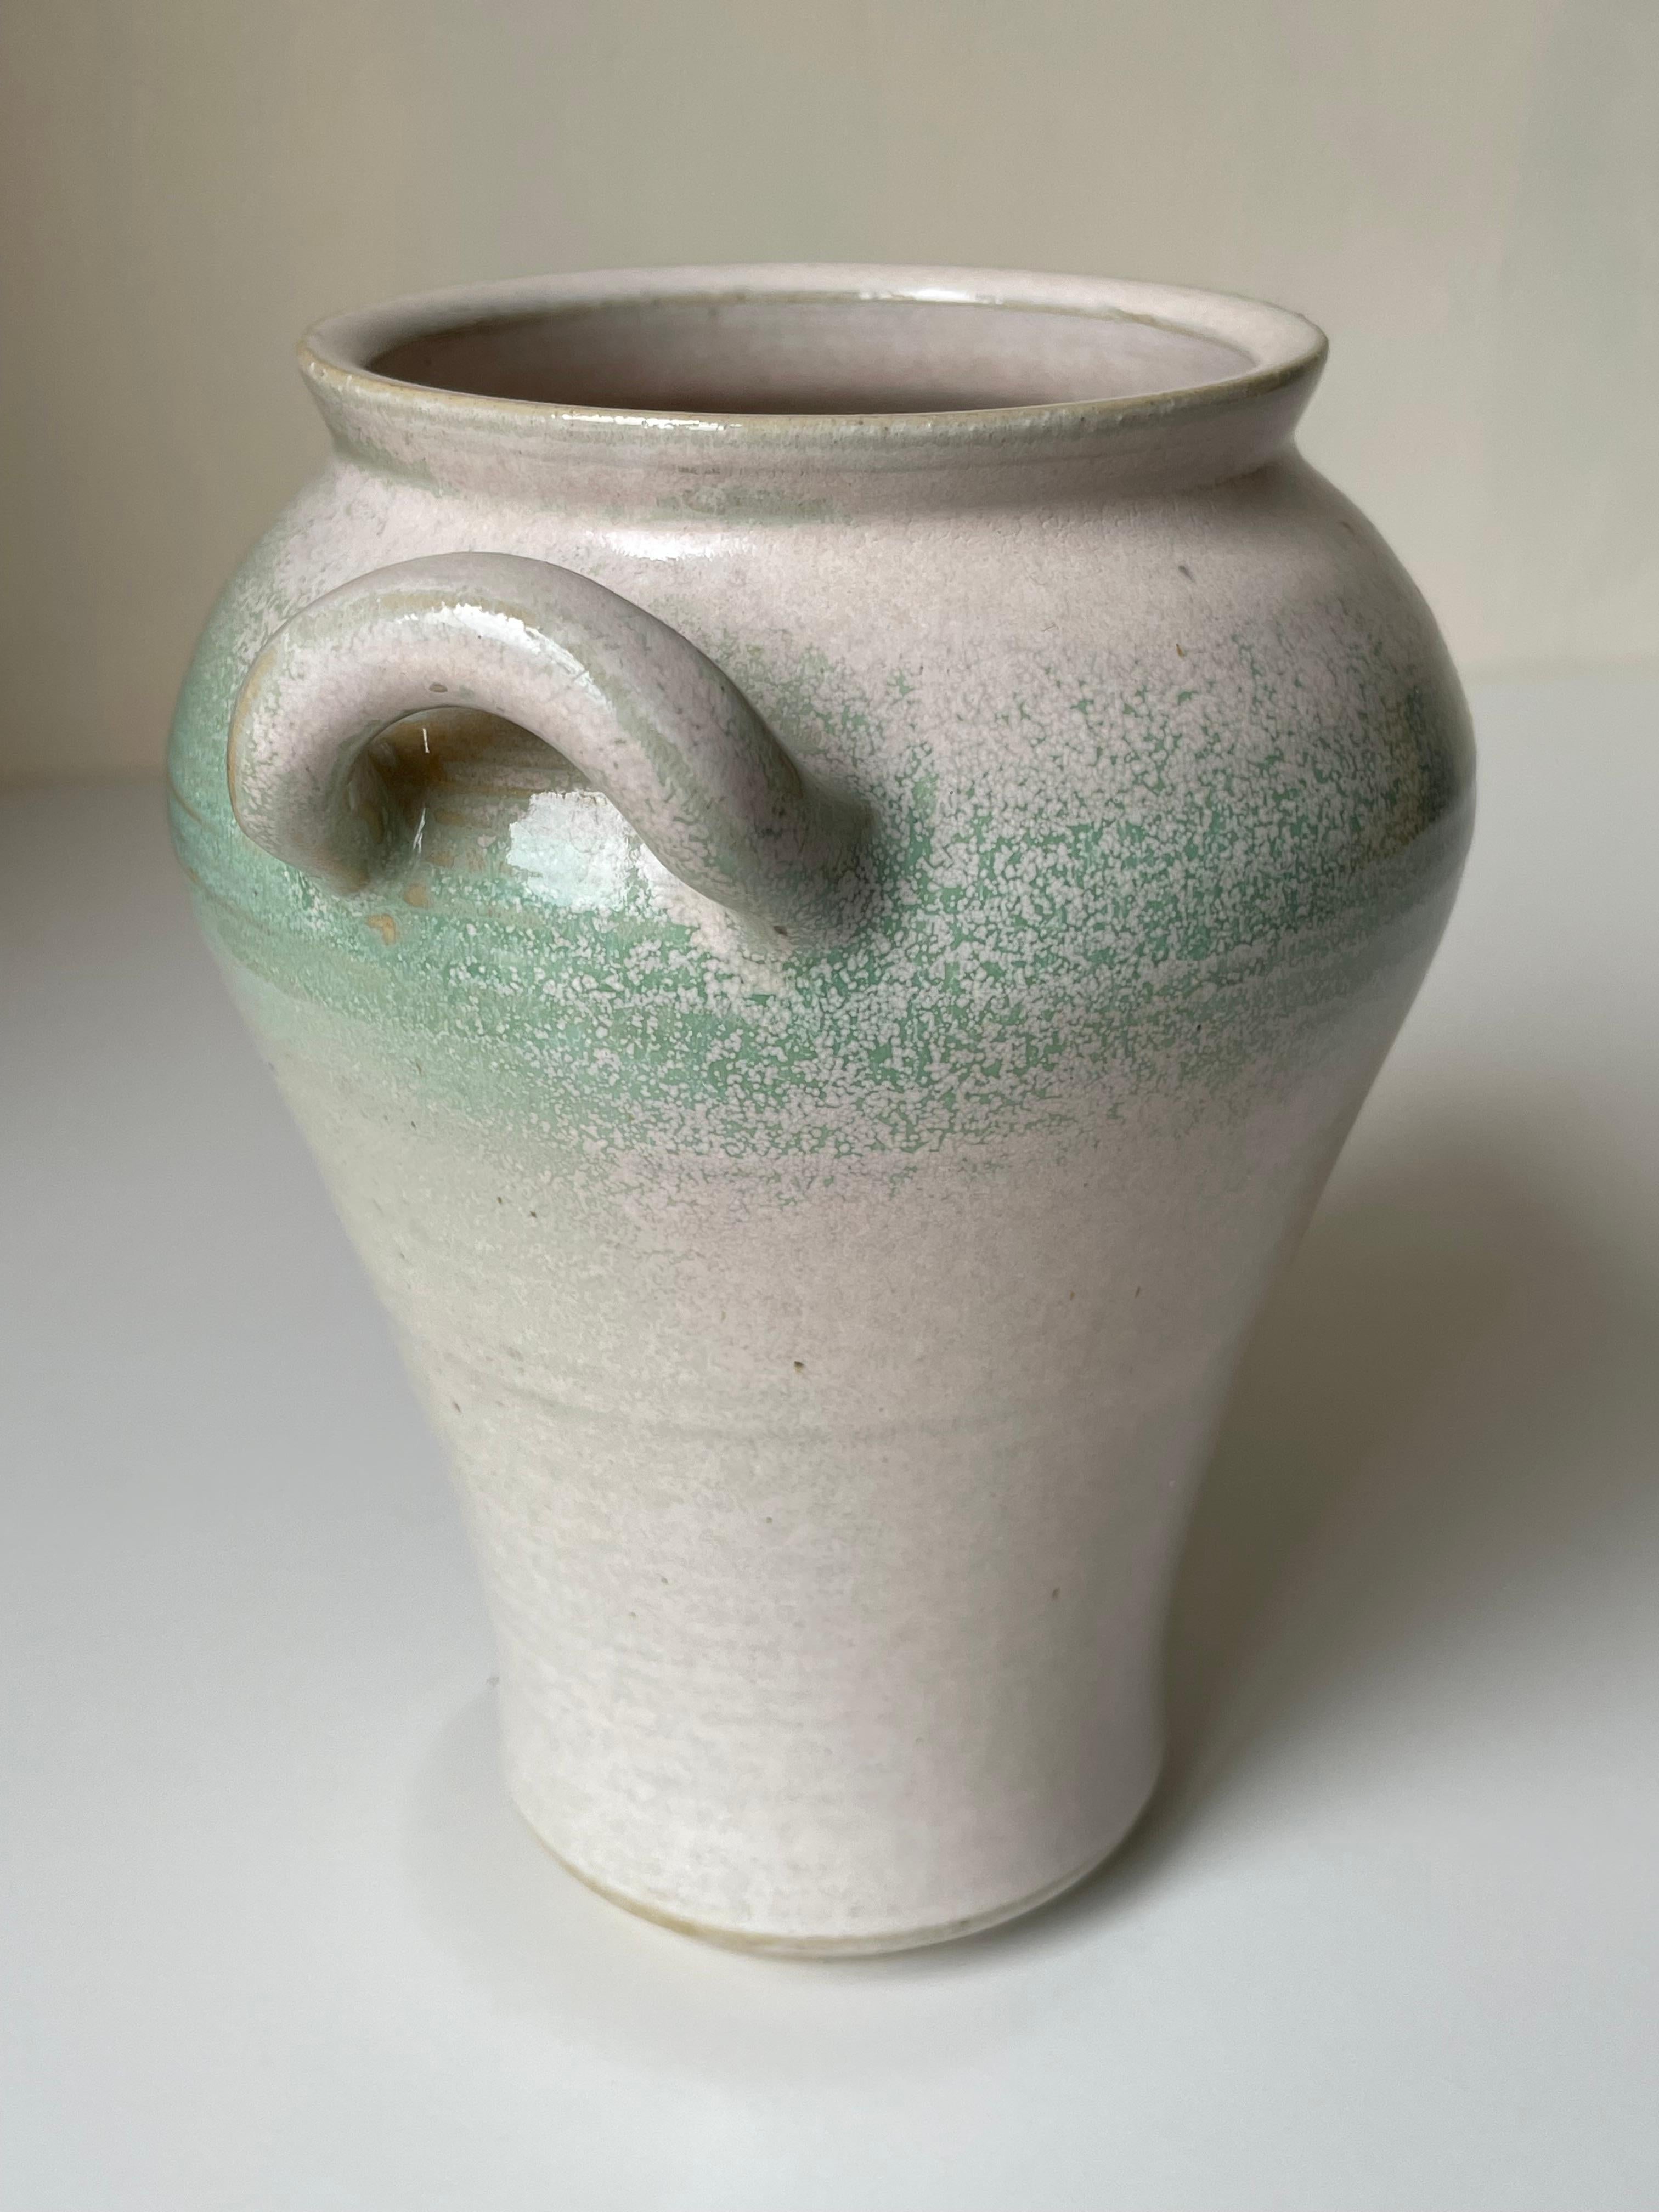 Beautifully glazed Nordic modern warm parchment white and pastel seafoam green amphora stoneware vase manufactured by Skottorp Stengods Hantwerk in Sweden in the 1970s. Two small soft shaped handles on the wide top. Stamped under base. Beautiful